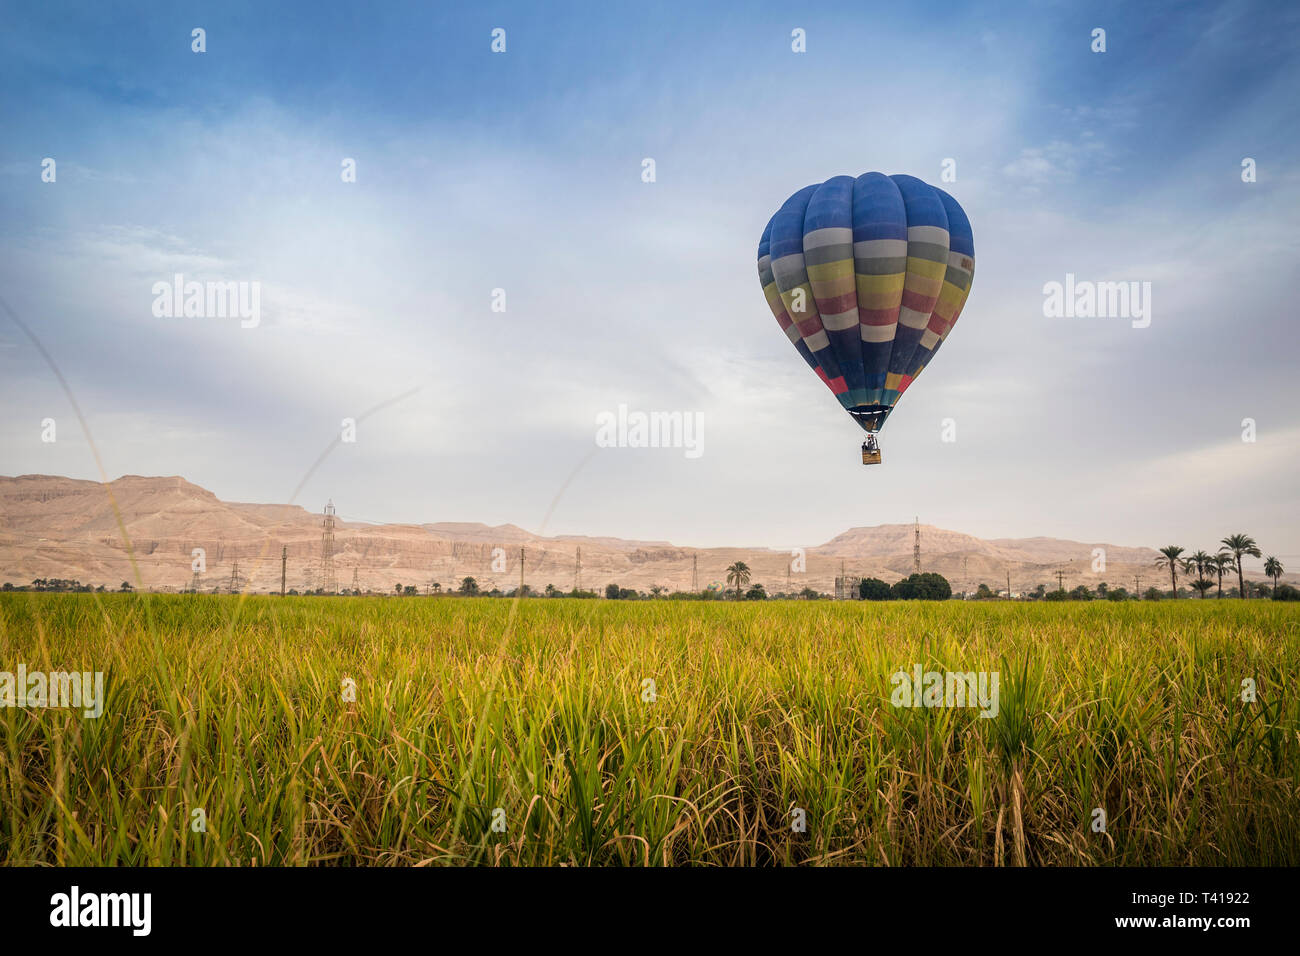 Hot air balloon flying over Valley of the Kings, Luxor, Egypt Stock Photo